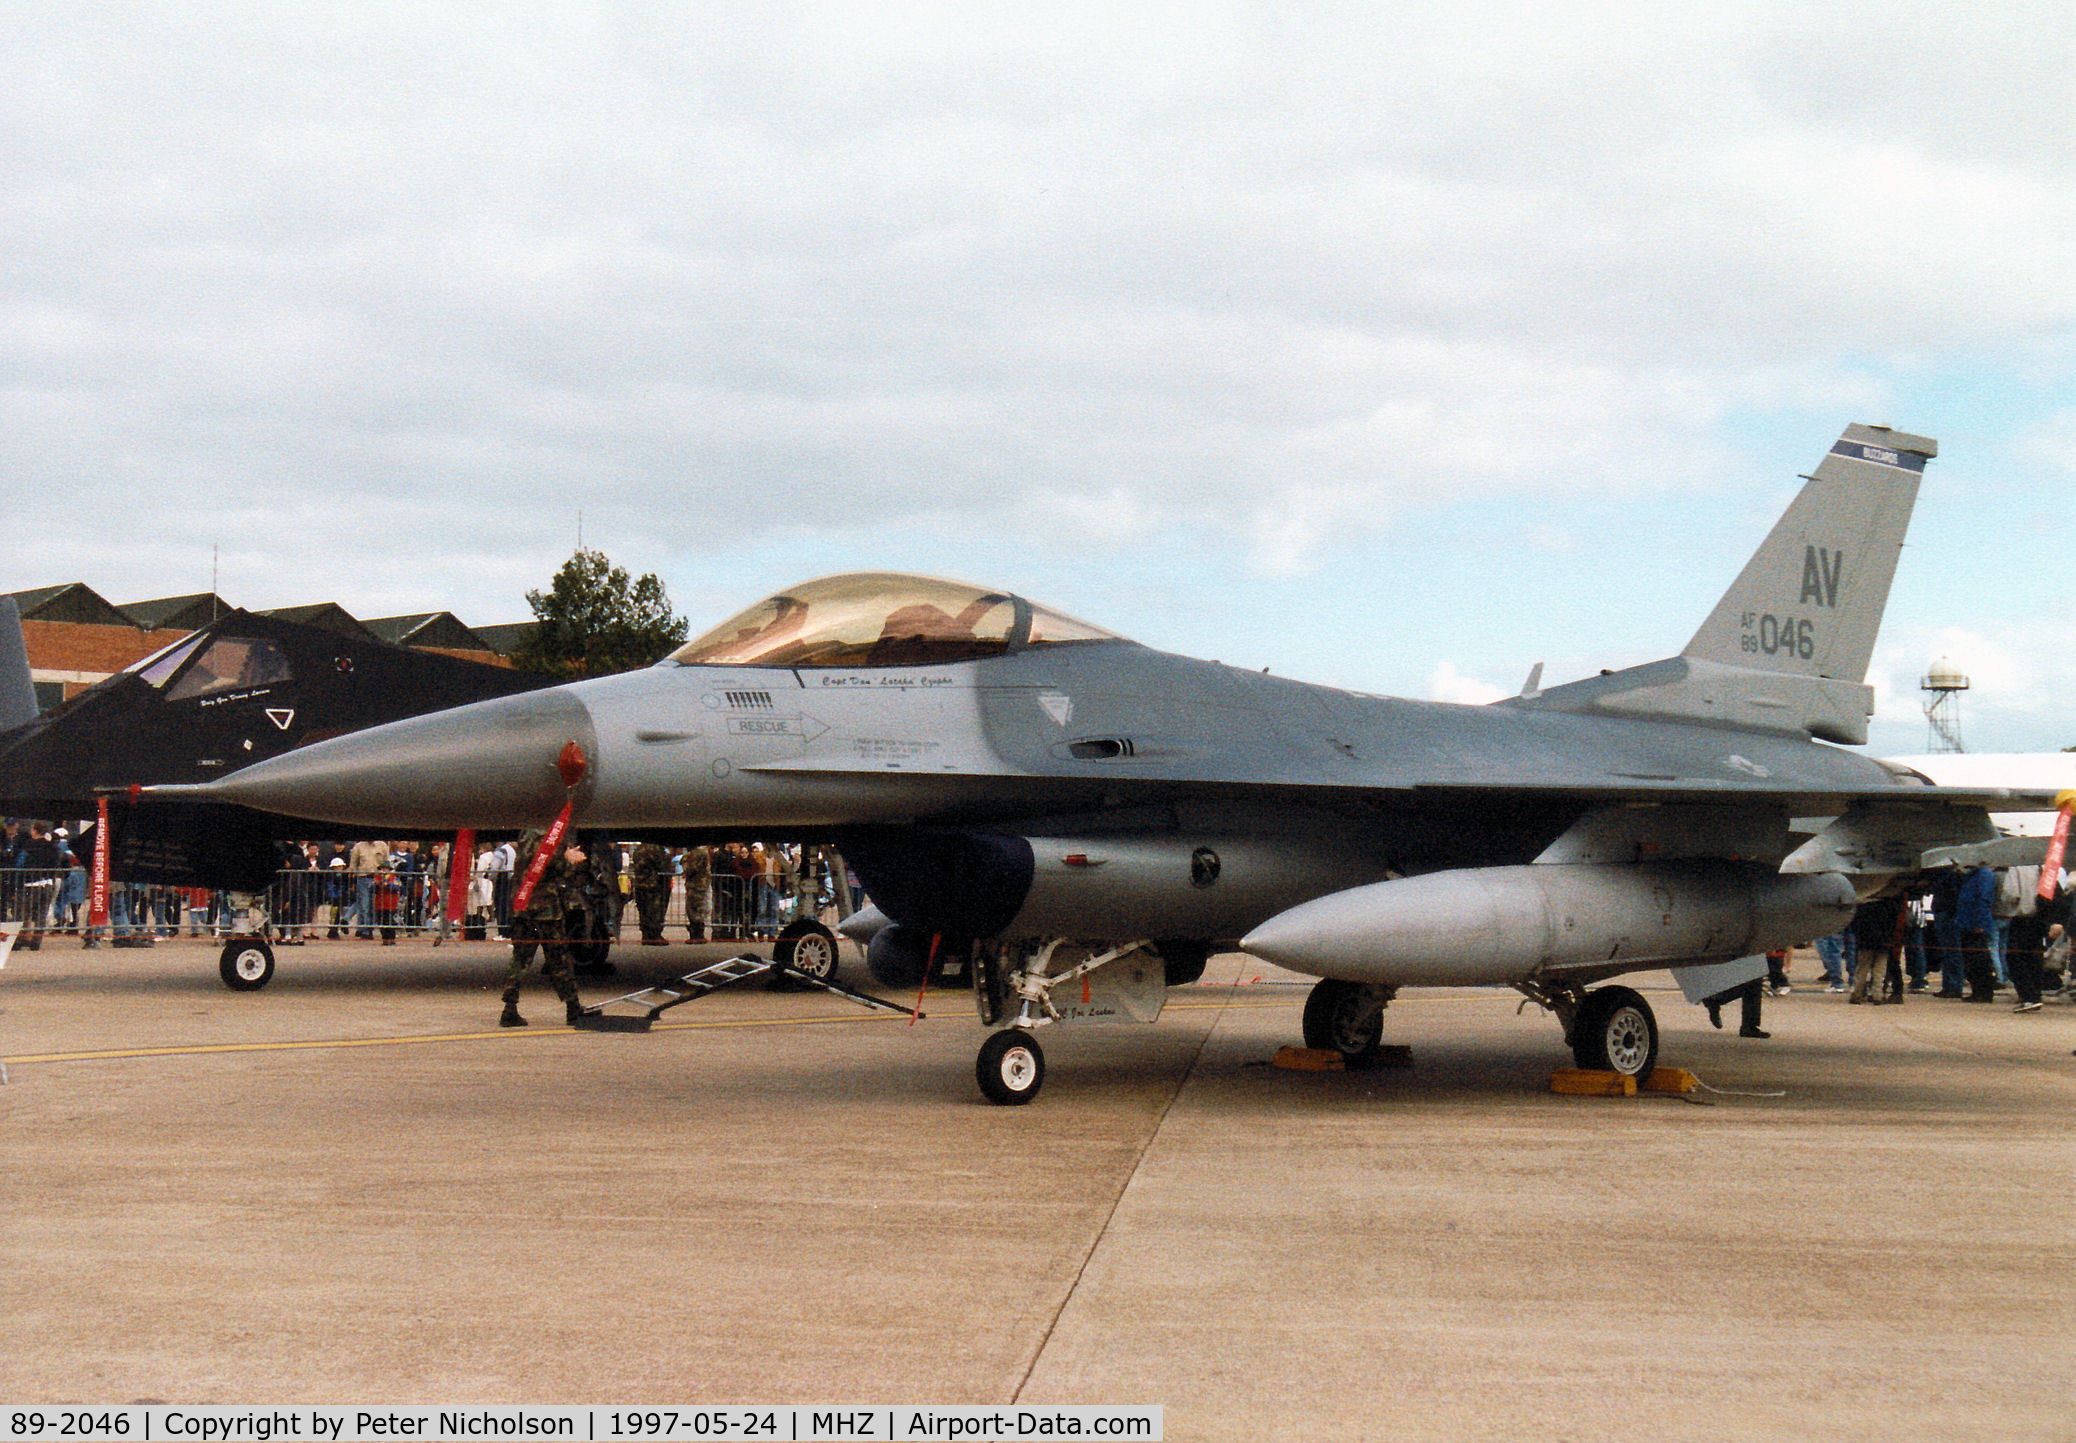 89-2046, 1989 General Dynamics F-16C Fighting Falcon C/N 1C-199, F-16C Fighting Falcon, callsign Spike 22, of Aviano's 510th Fighter Squadron/31st Fighter Wing on display at the 1997 RAF Mildenhall Air Fete.